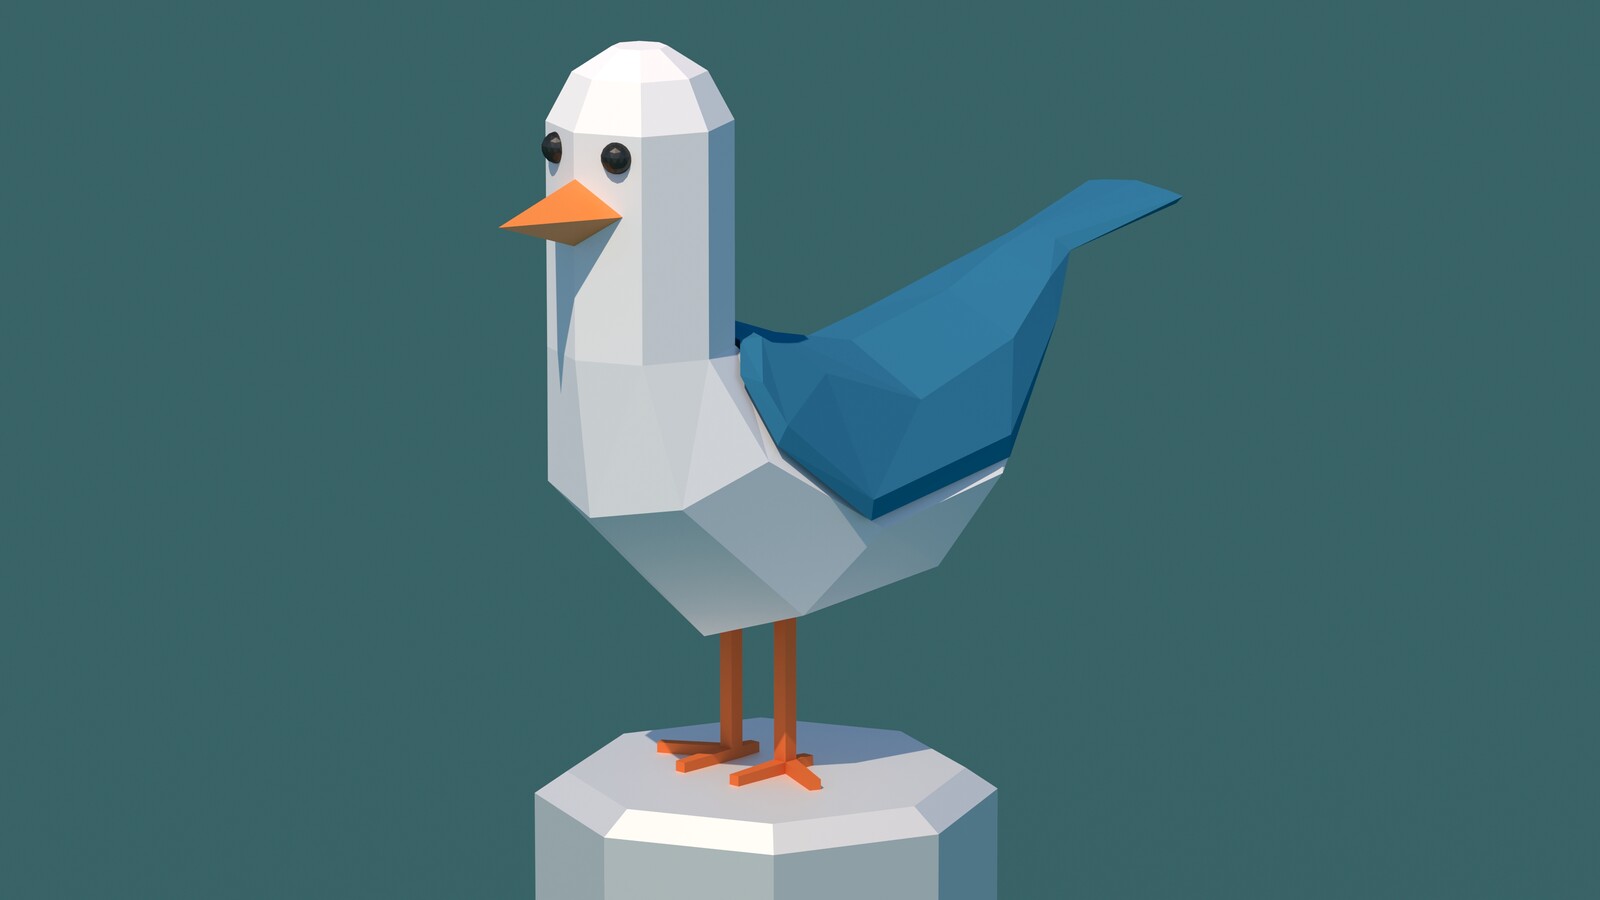 Cute little seagull, also present in my avatar